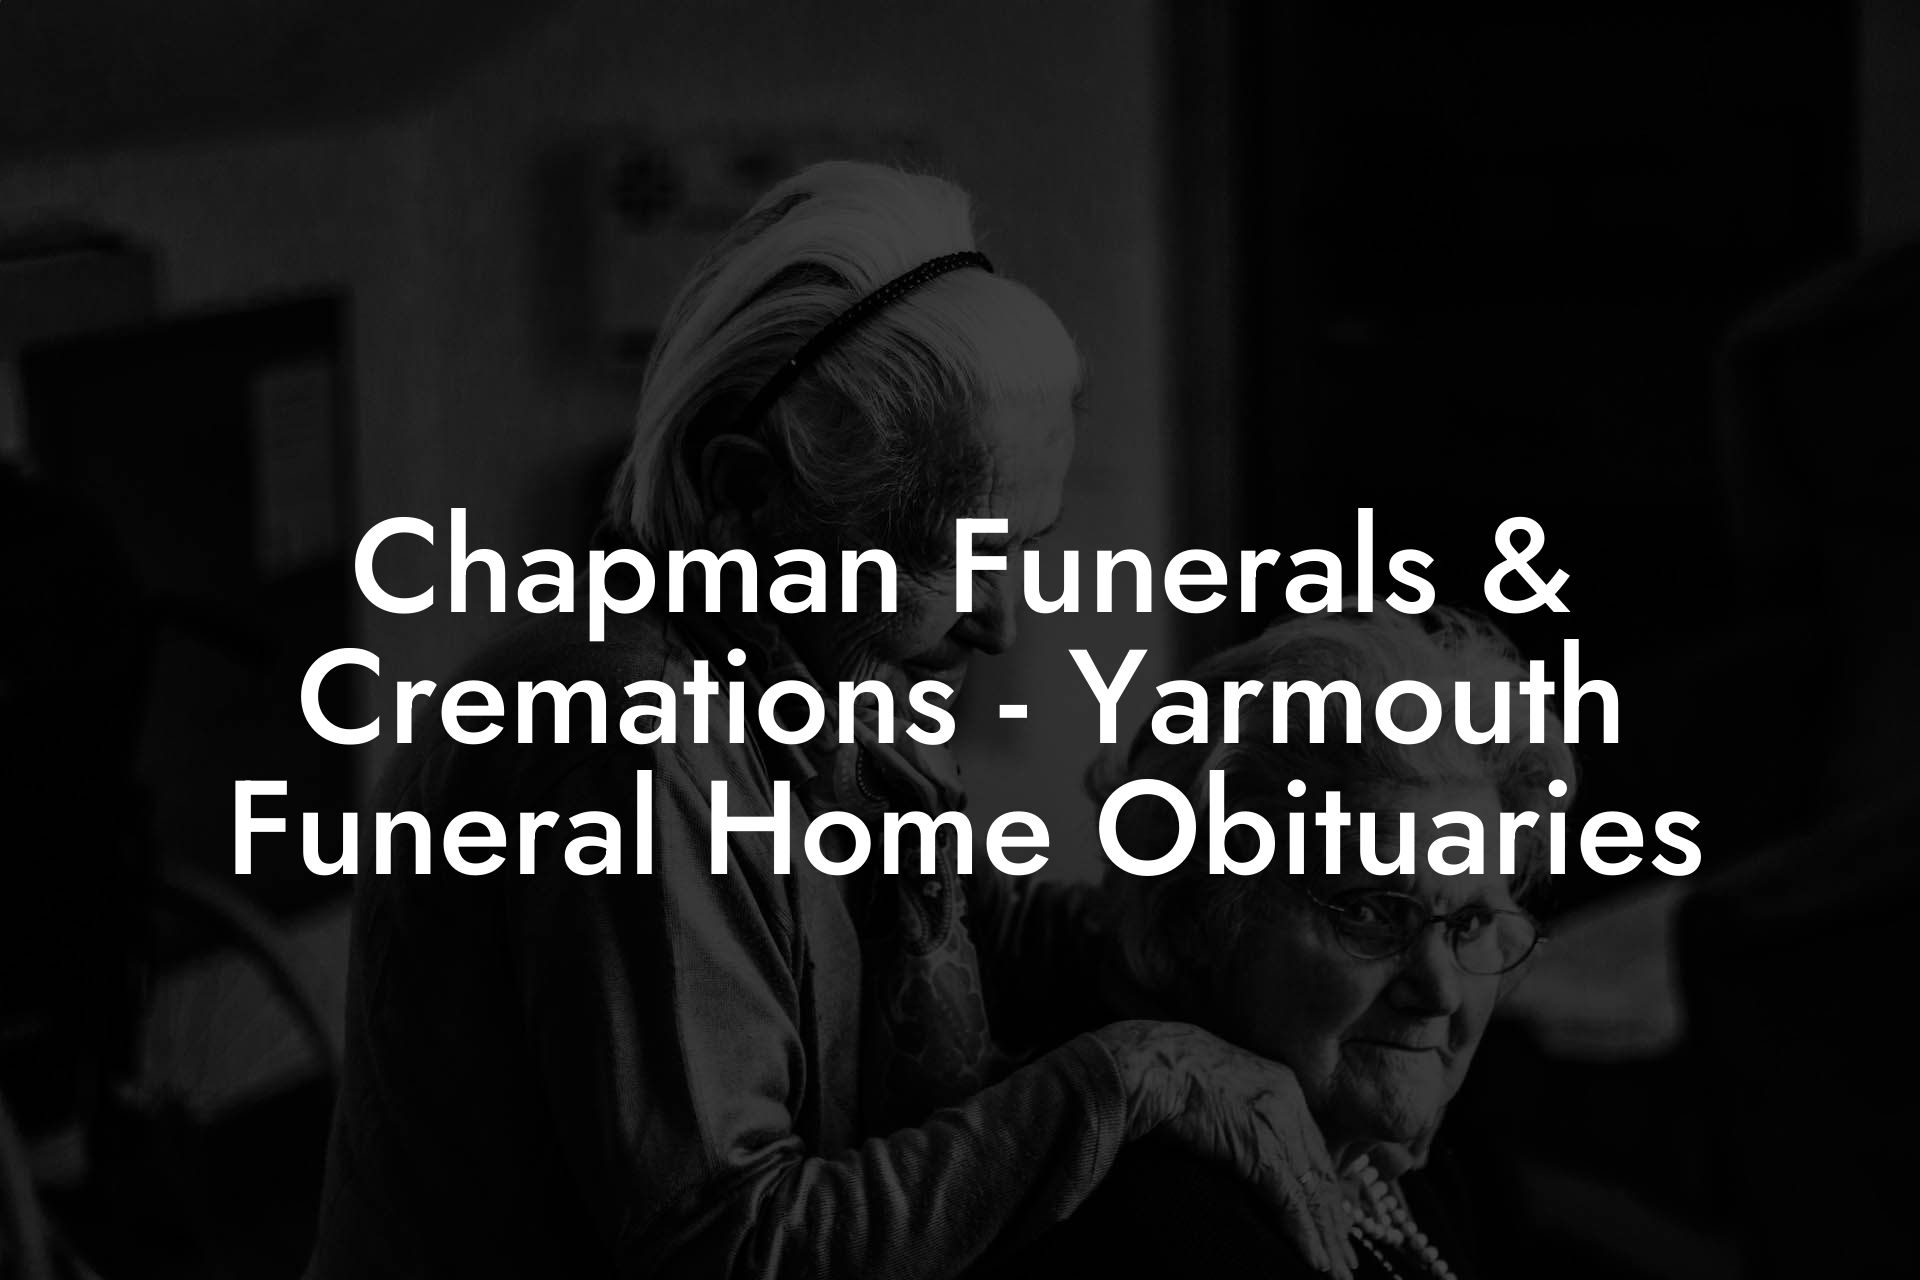 Chapman Funerals & Cremations - Yarmouth Funeral Home Obituaries